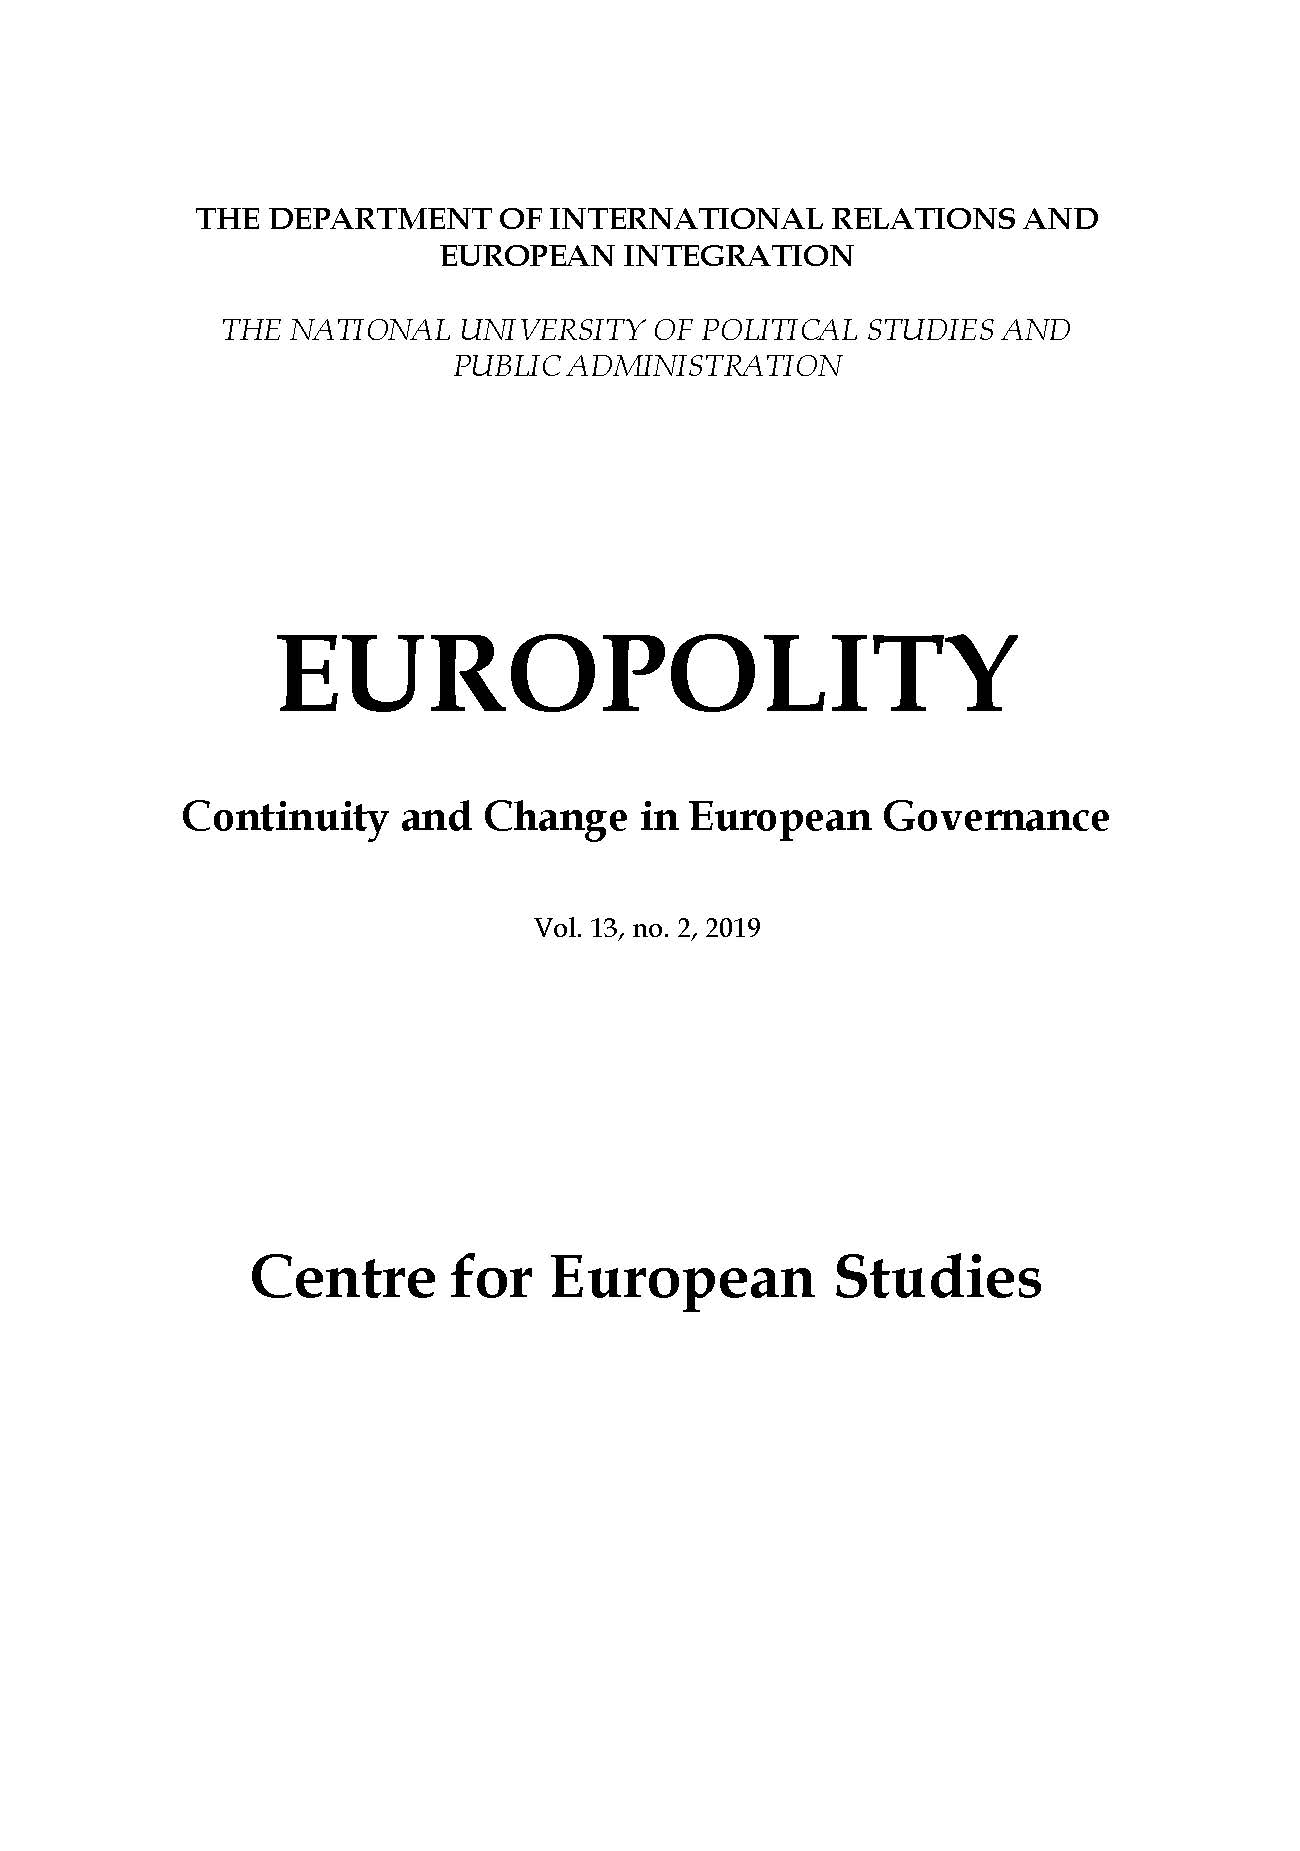 THE ROOTS OF ISLAMOPHOBIA IN CONTEMPORARY EUROPE. THE RESULTS OF AN EMPIRICAL RESEARCH Cover Image